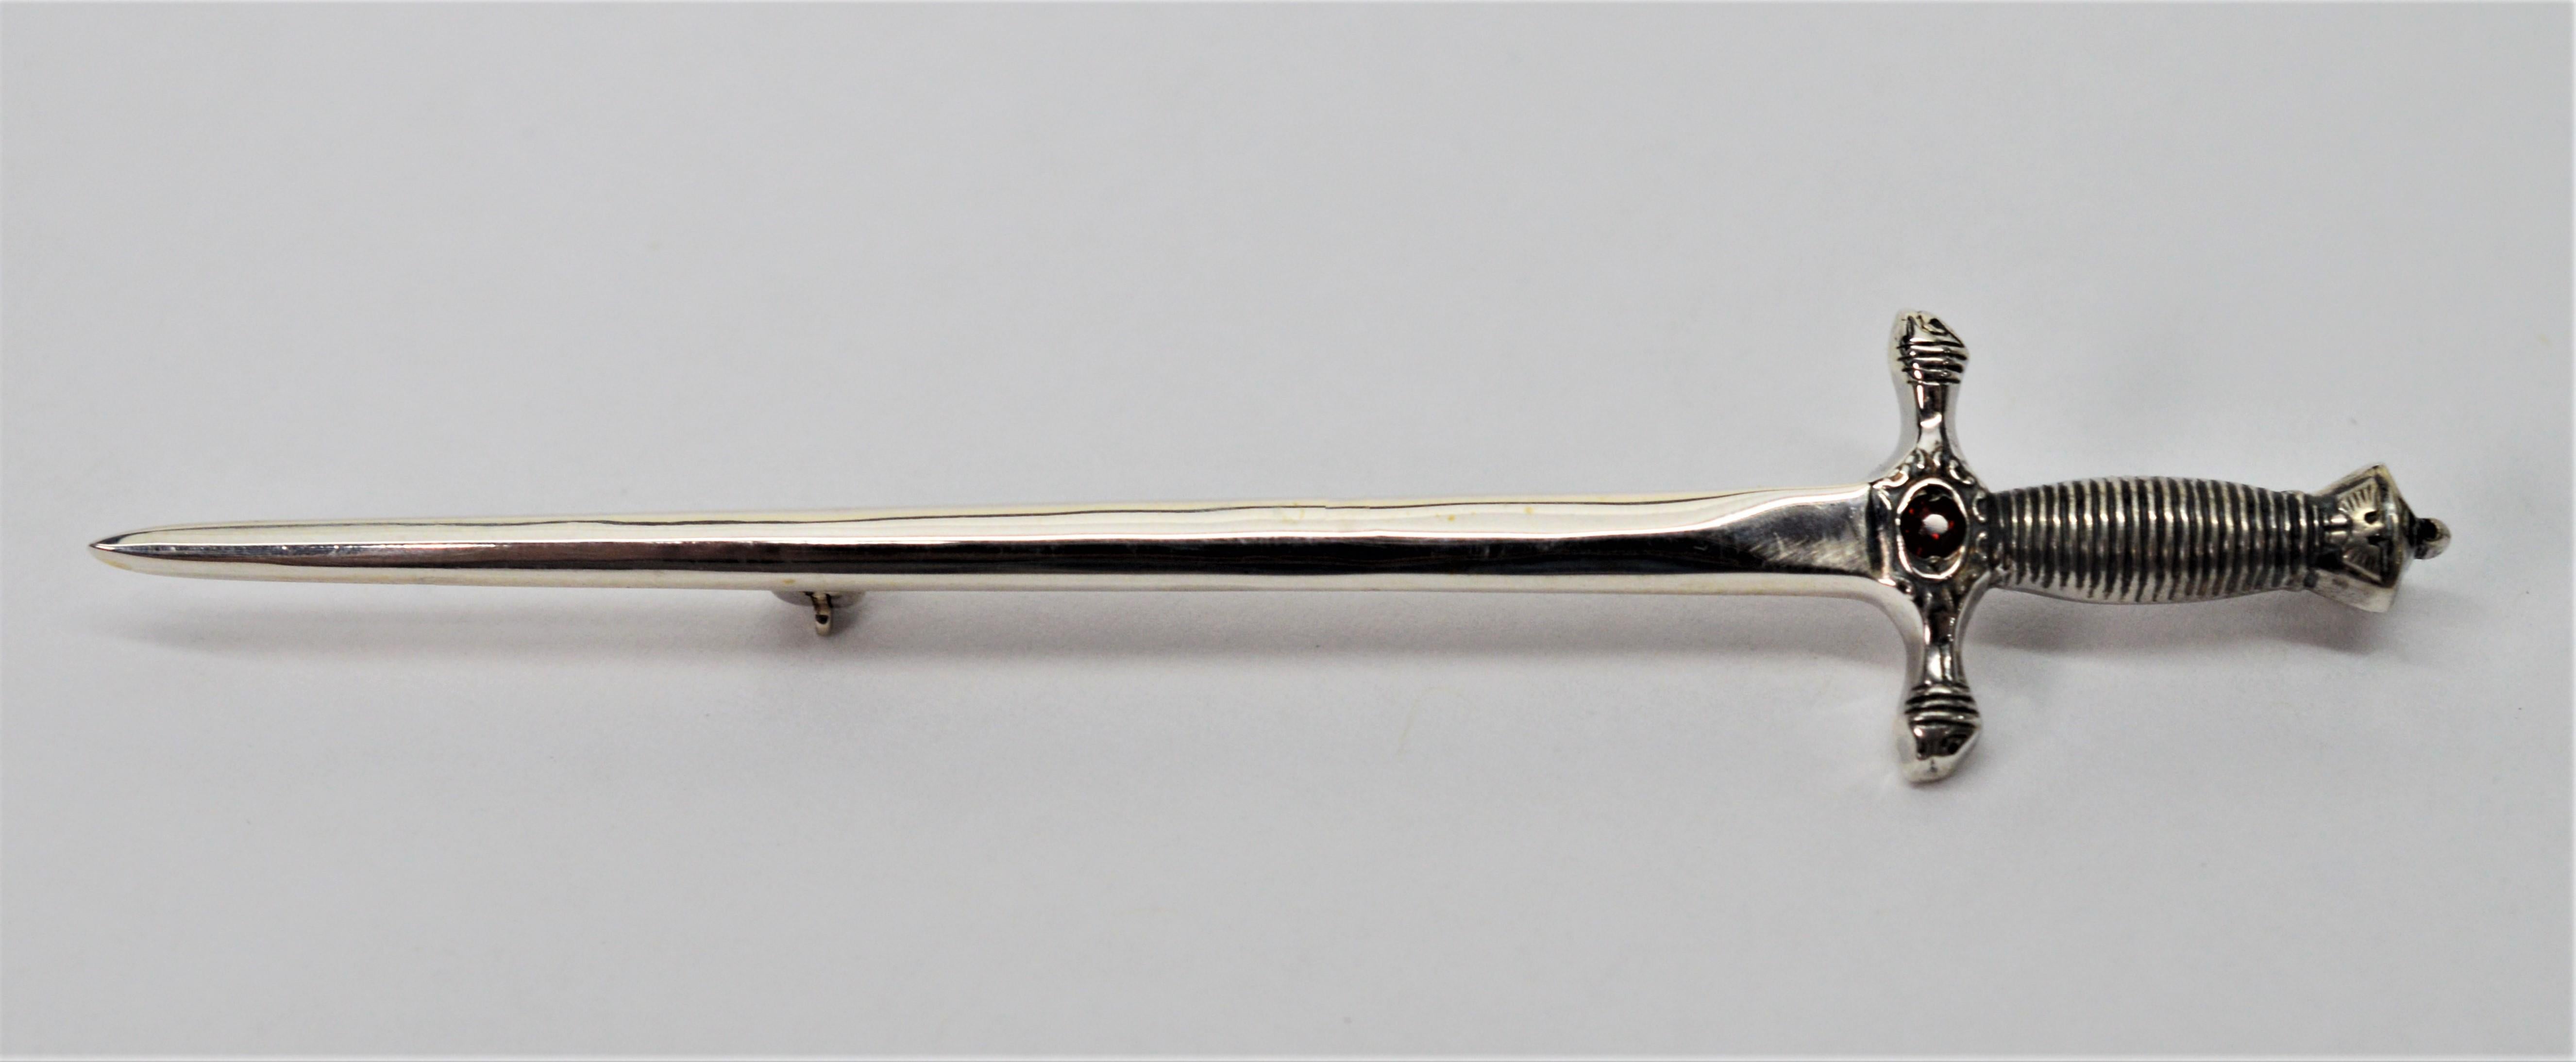 Wield power when wearing this sword pin. Made in sterling silver with a garnet gemstone on the guard. Crafted in detail with a textured grip and decorative pommel. Measures 2-7/8 inches in length. The pin closure is a modern safety catch. In gift